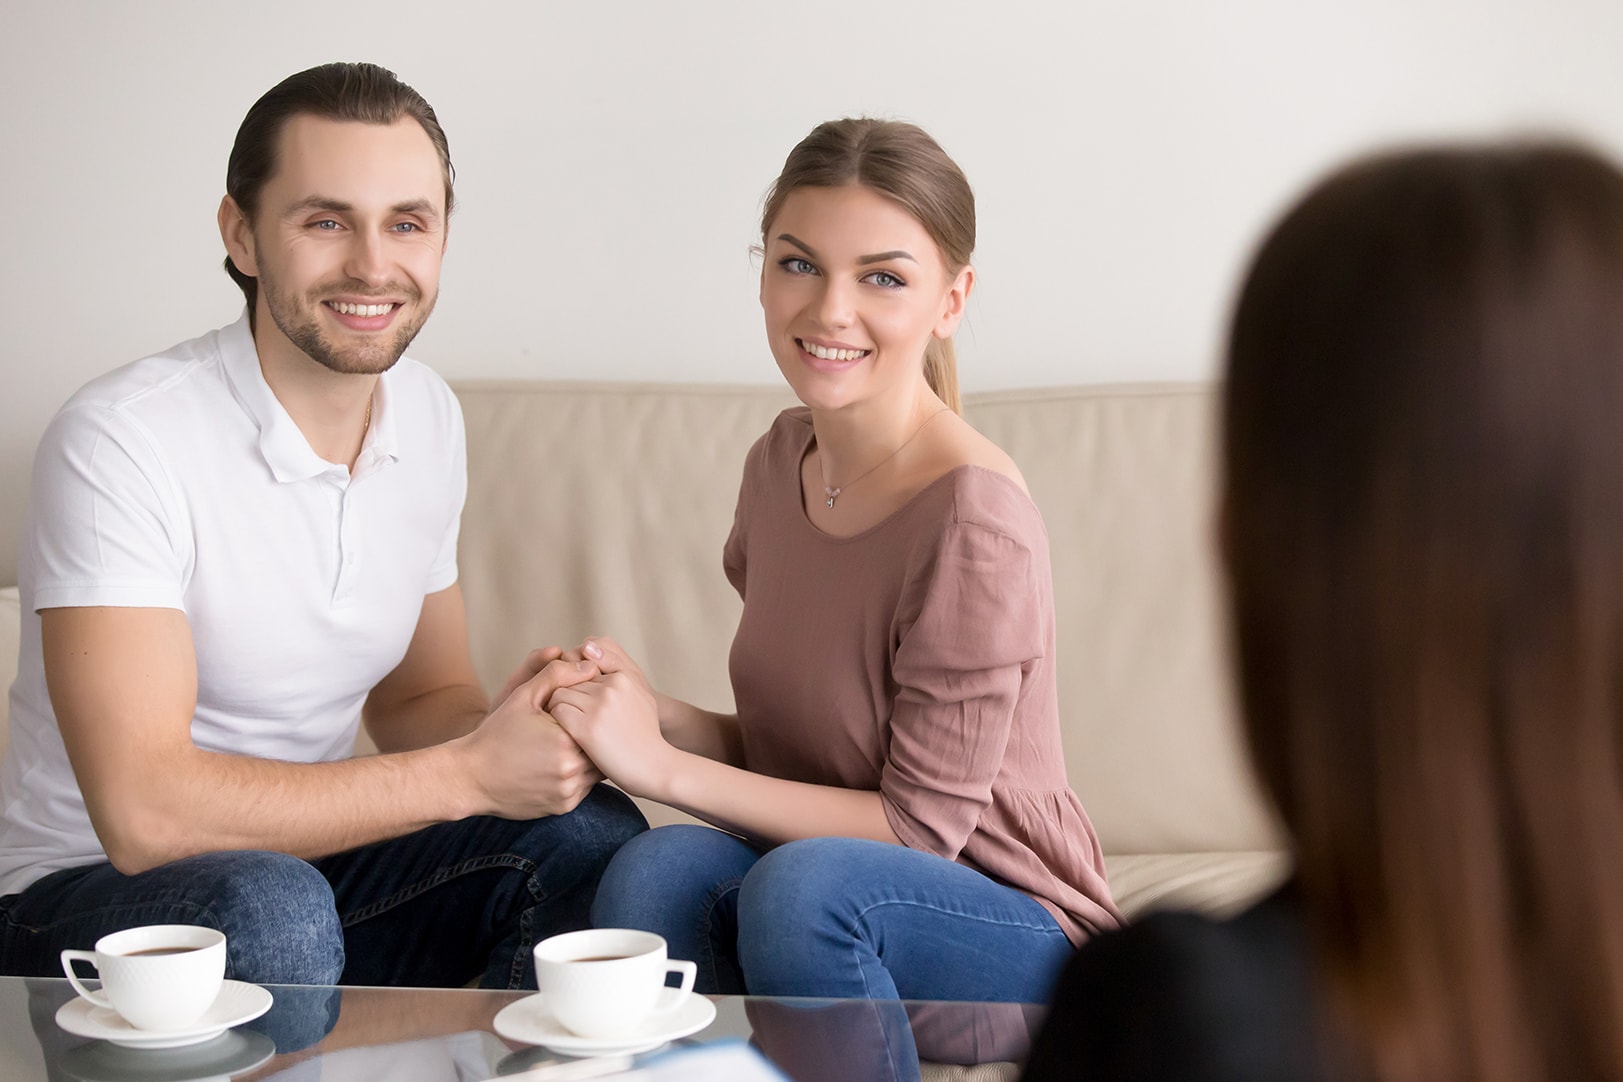 A couples relationship counseling engaging in relationship counseling, sitting together and holding hands, with an attentive focus towards a counselor in Sarasota